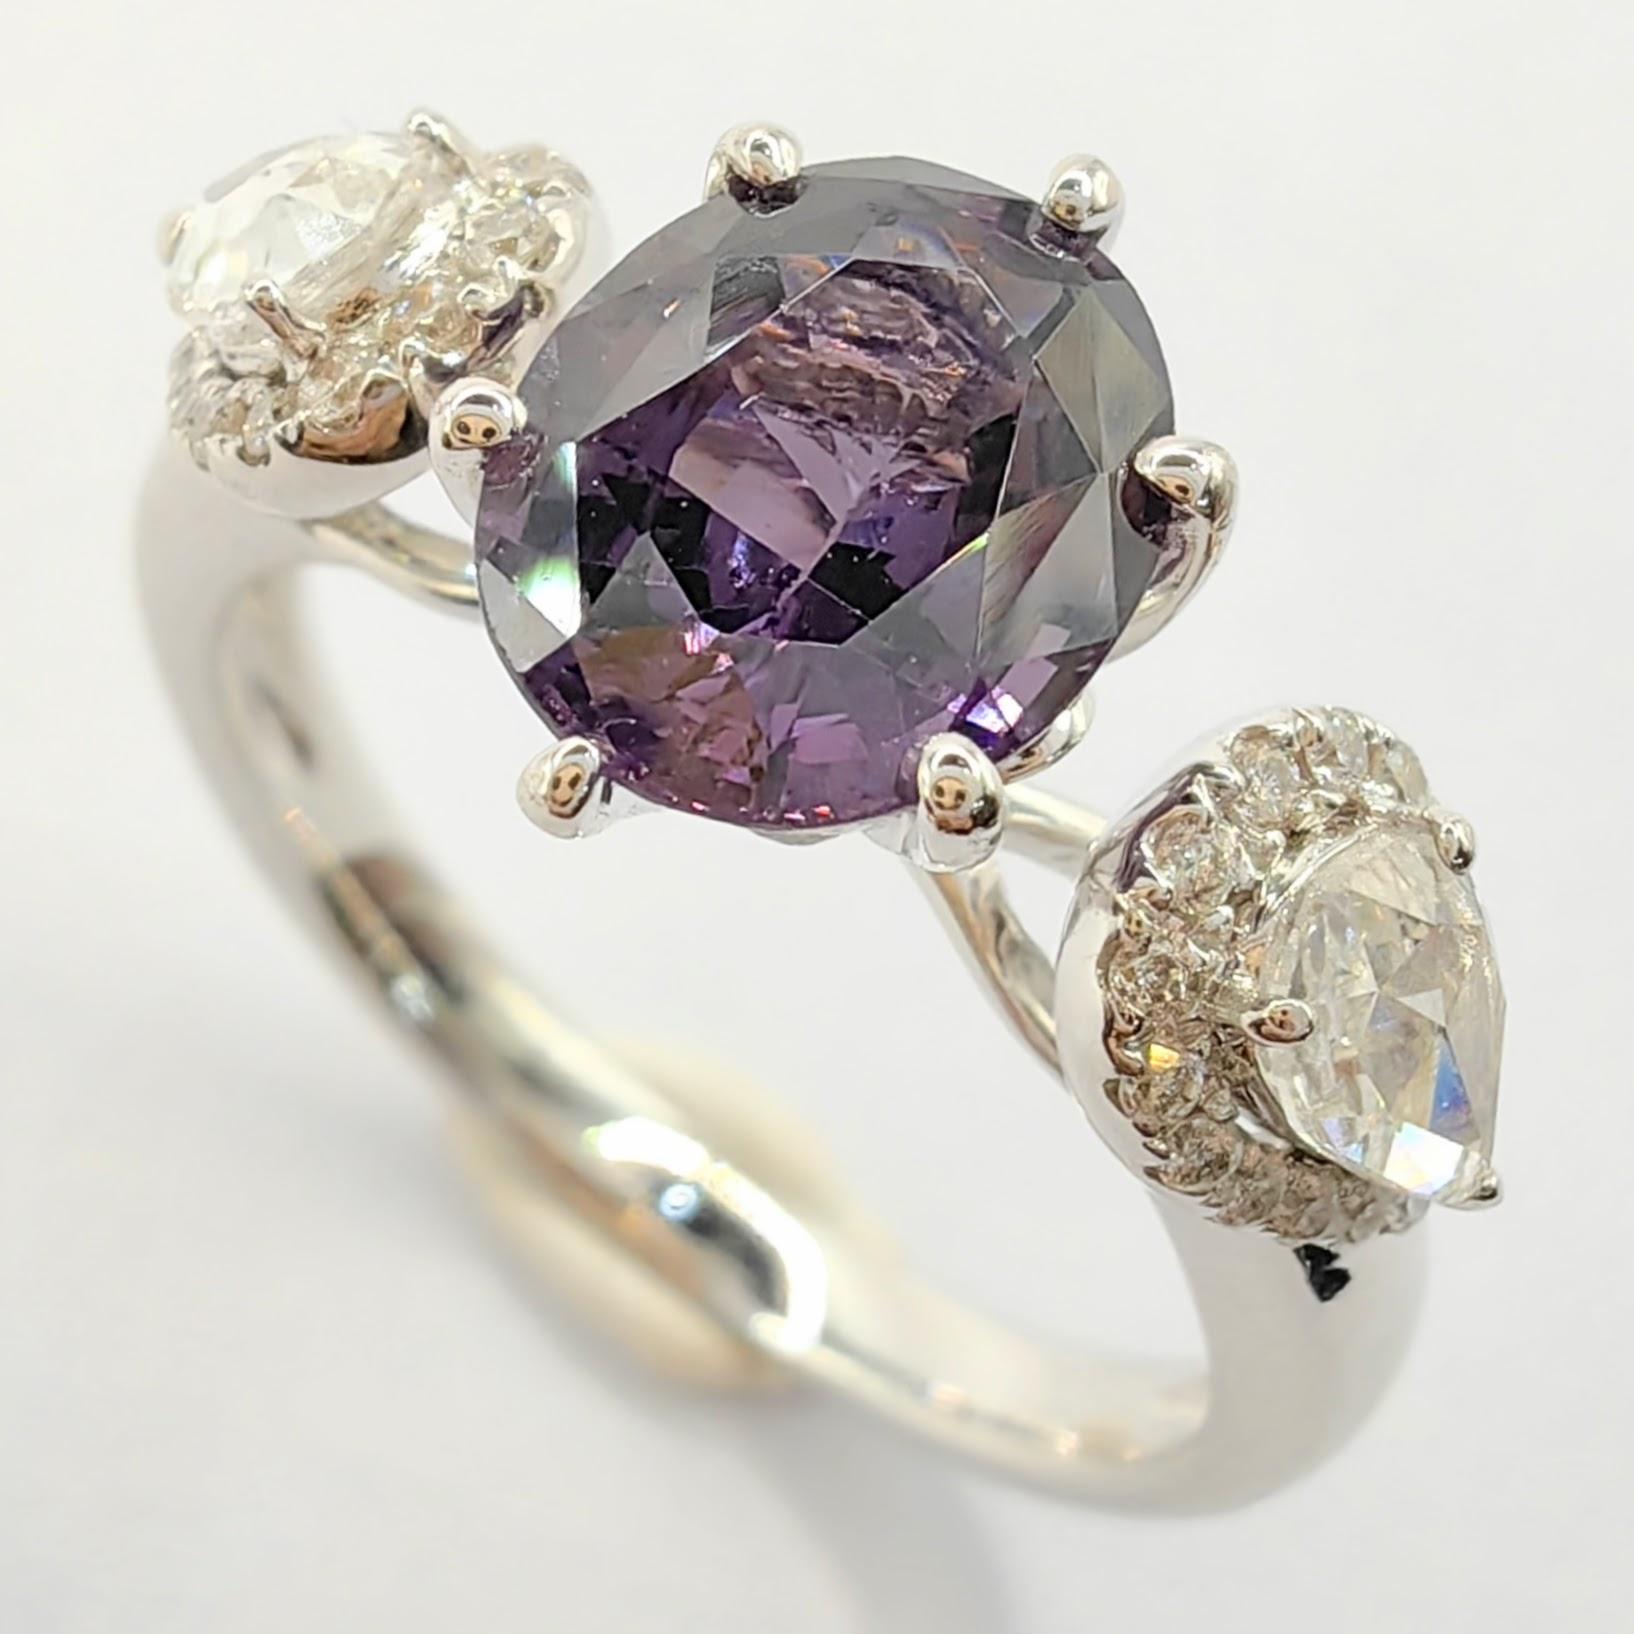 Contemporary 1.19 Carat Oval Cut Purple Spinel Rose Cut Halo Diamond Ring in 18K White Gold For Sale